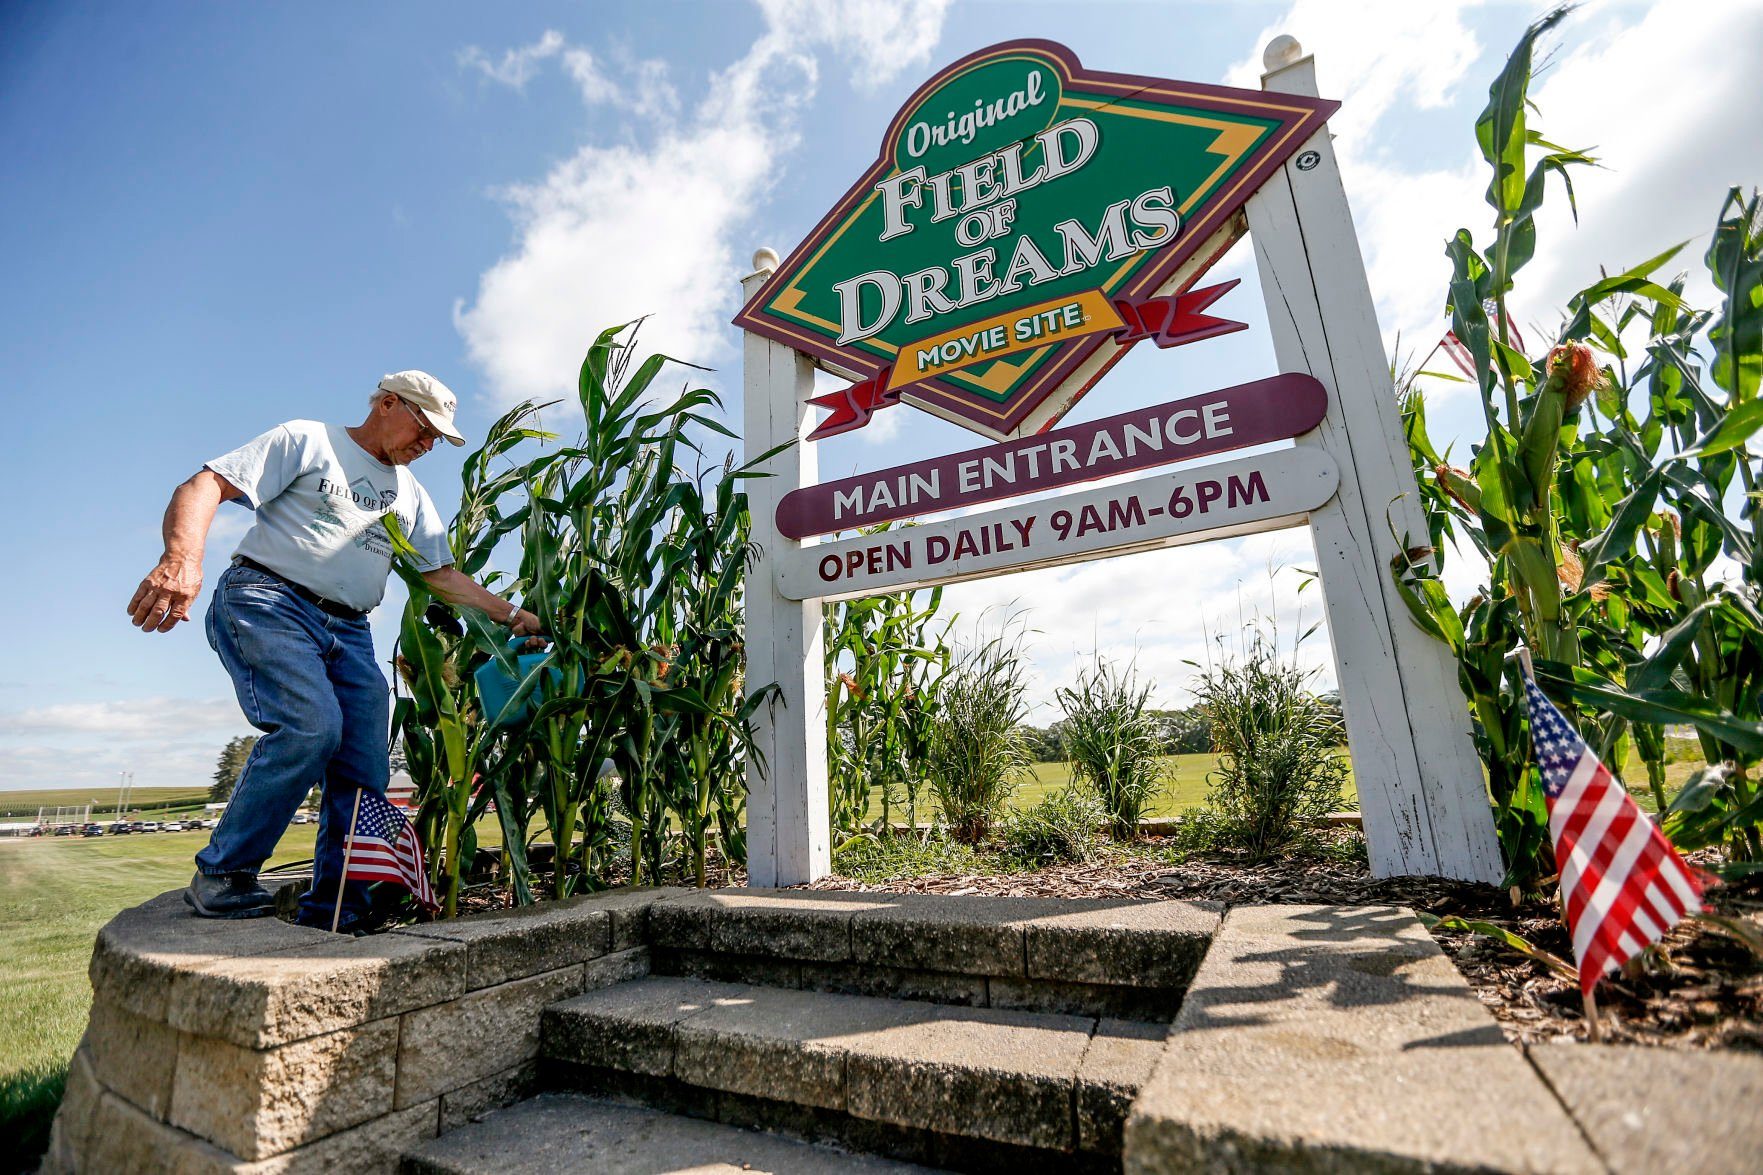 Field of Dreams employee Clarence Heacock waters the corn surrounding the entrance sign at the movie site located in Dyersville, Iowa on Monday.    PHOTO CREDIT: Dave Kettering